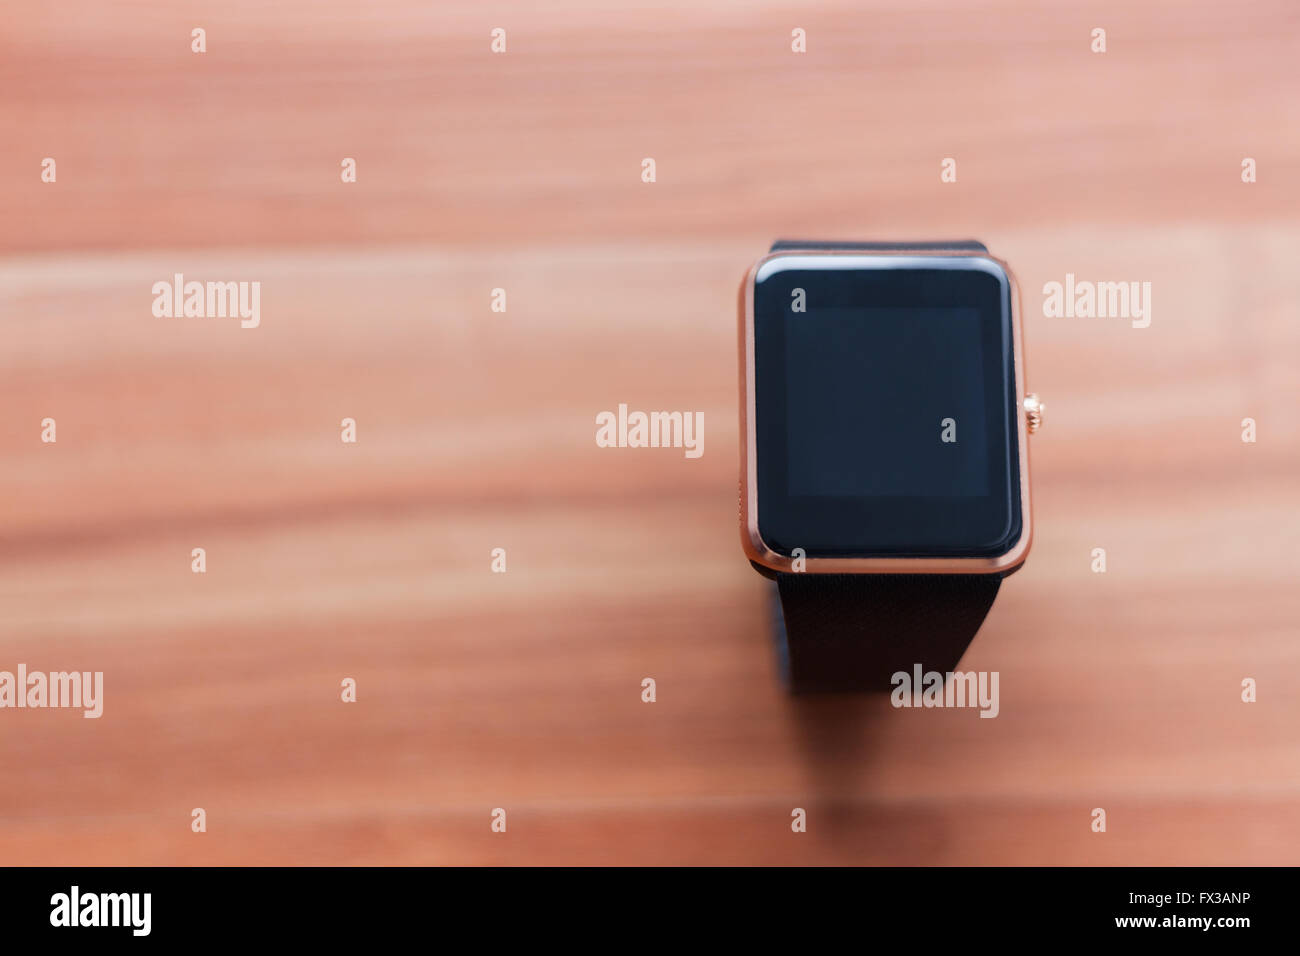 Smart wrist watch laying on the wooden background. Elegant new technology that lets you always stay connected Stock Photo